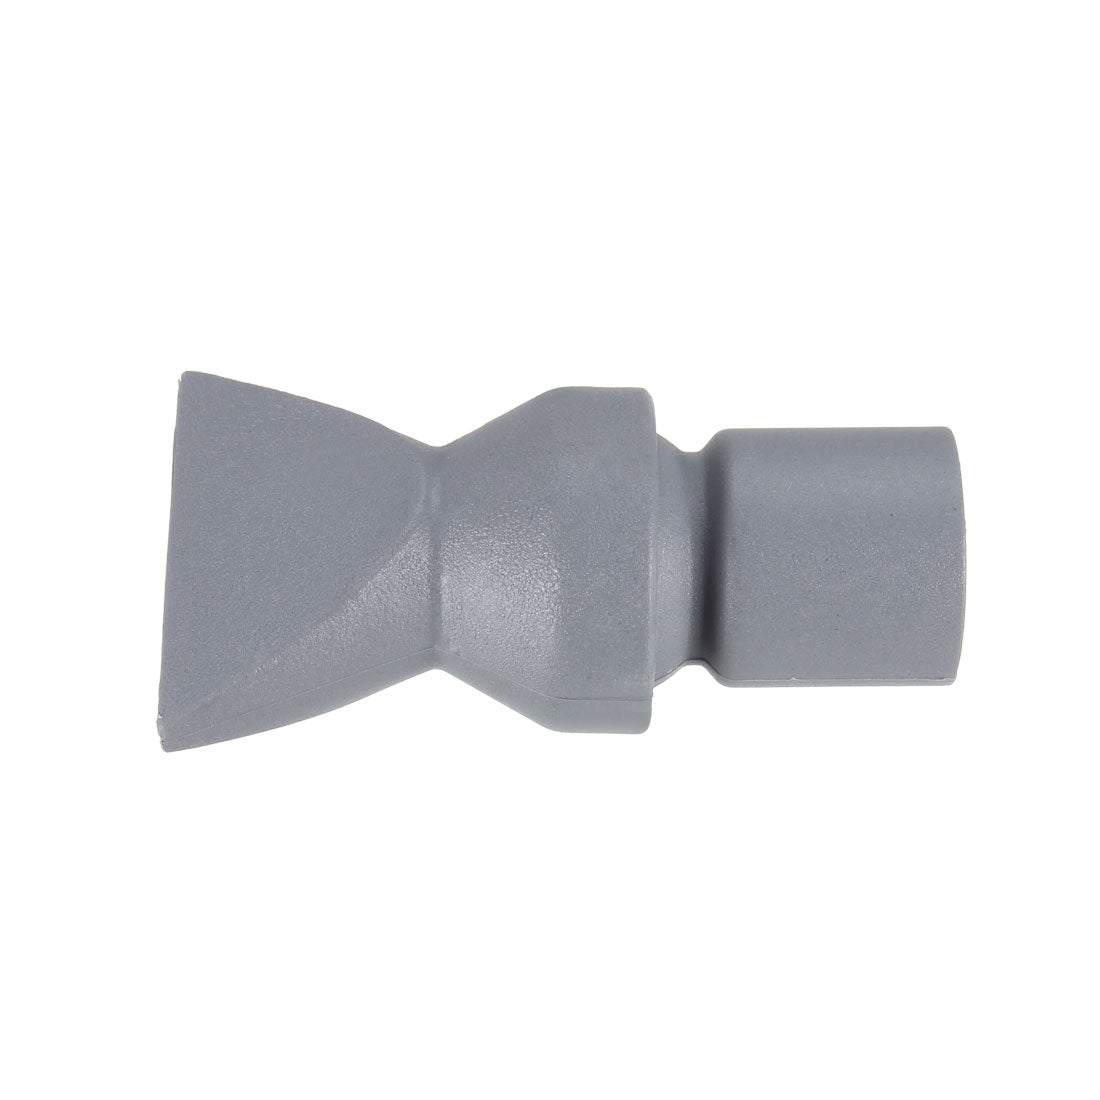 uxcell Uxcell Aquarium Nozzle Pump Nozzles Water Outlet Return Pipe Fitting Gray 15.5mmOD 3Pcs